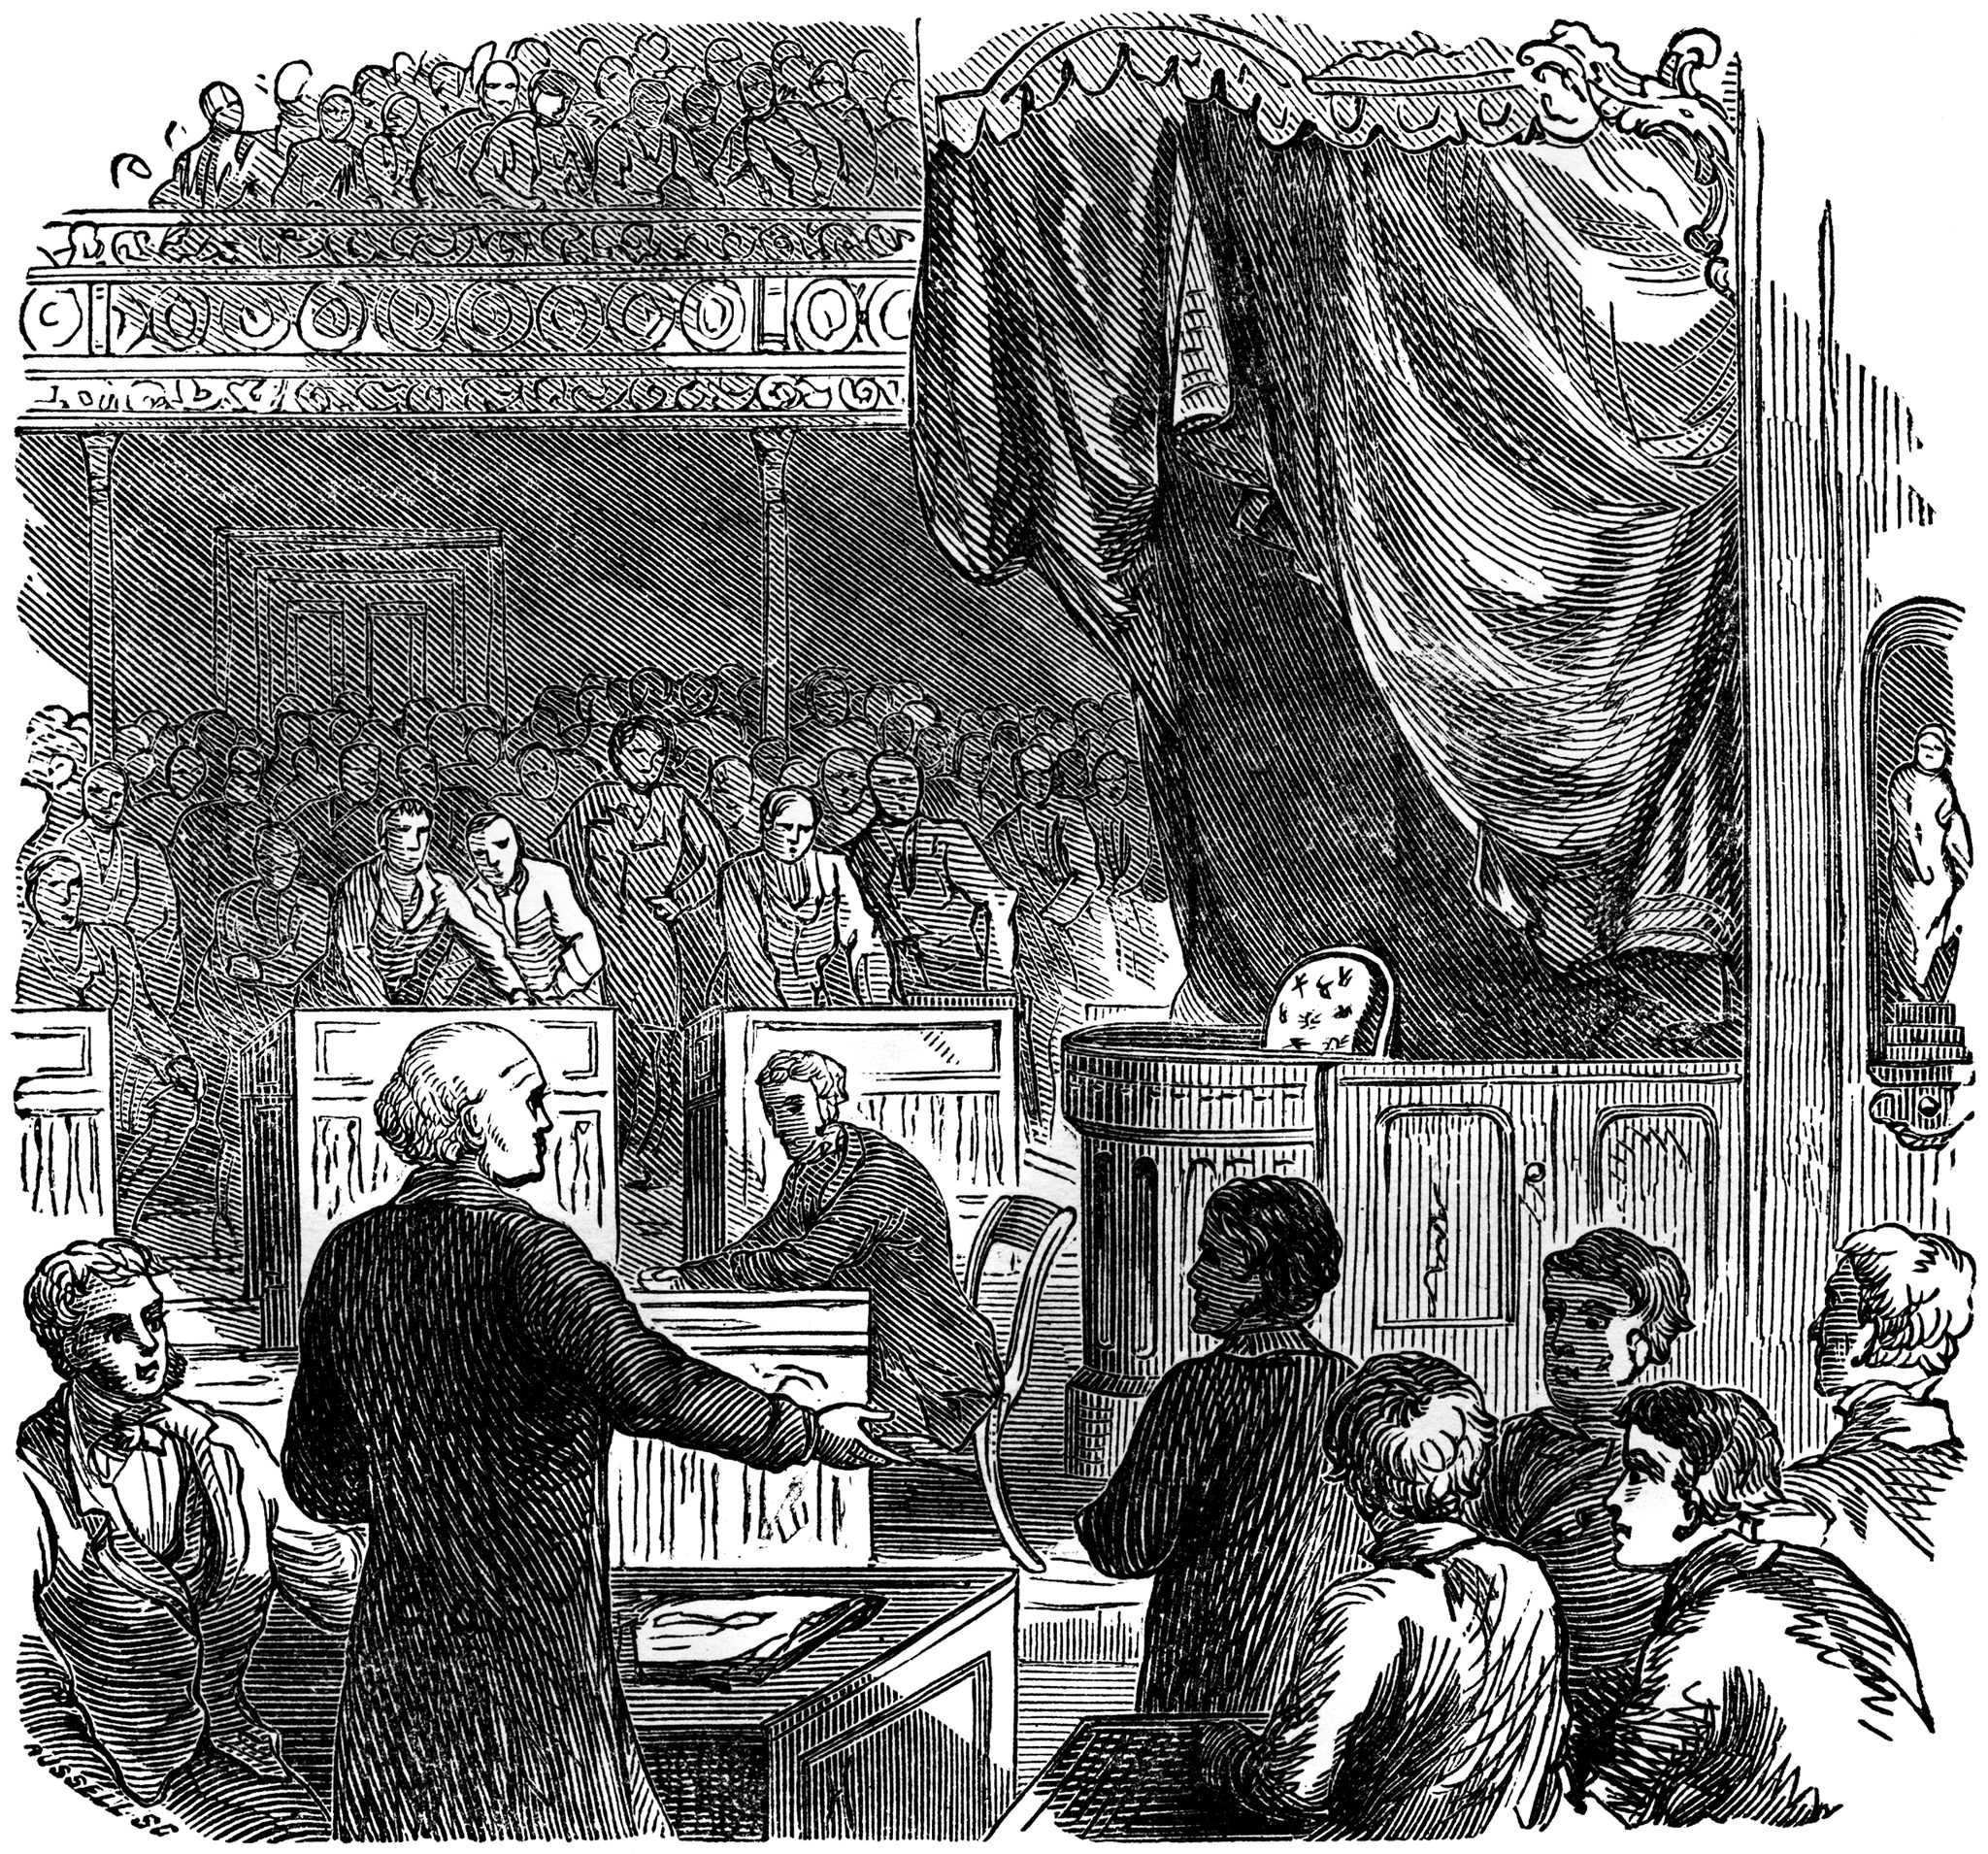 Black and white illustration of John Quincy Adams in the House of Representatives